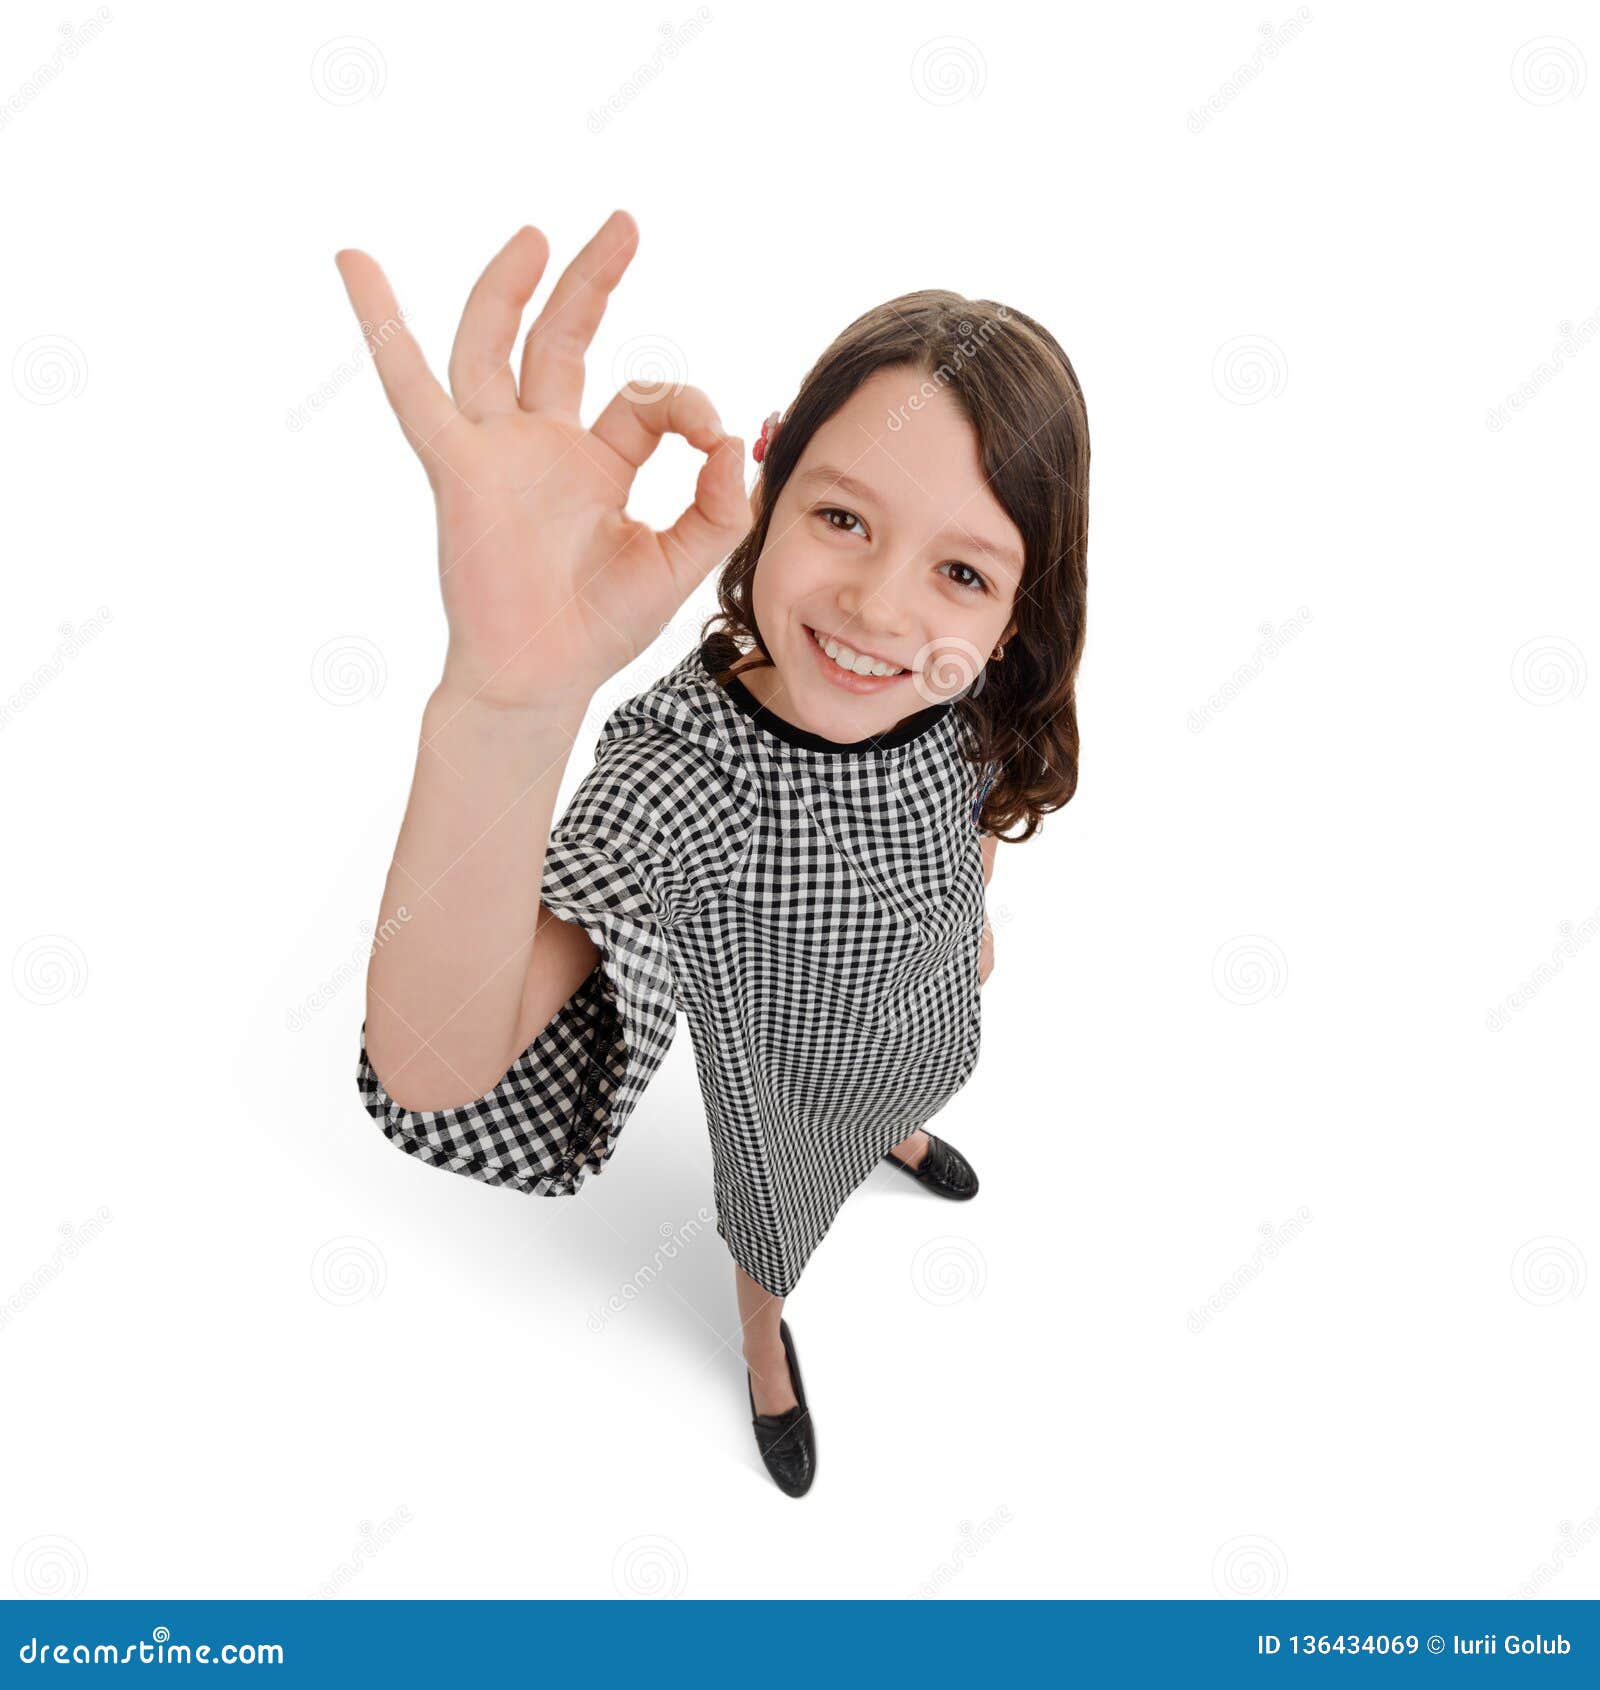 child showing alright sign